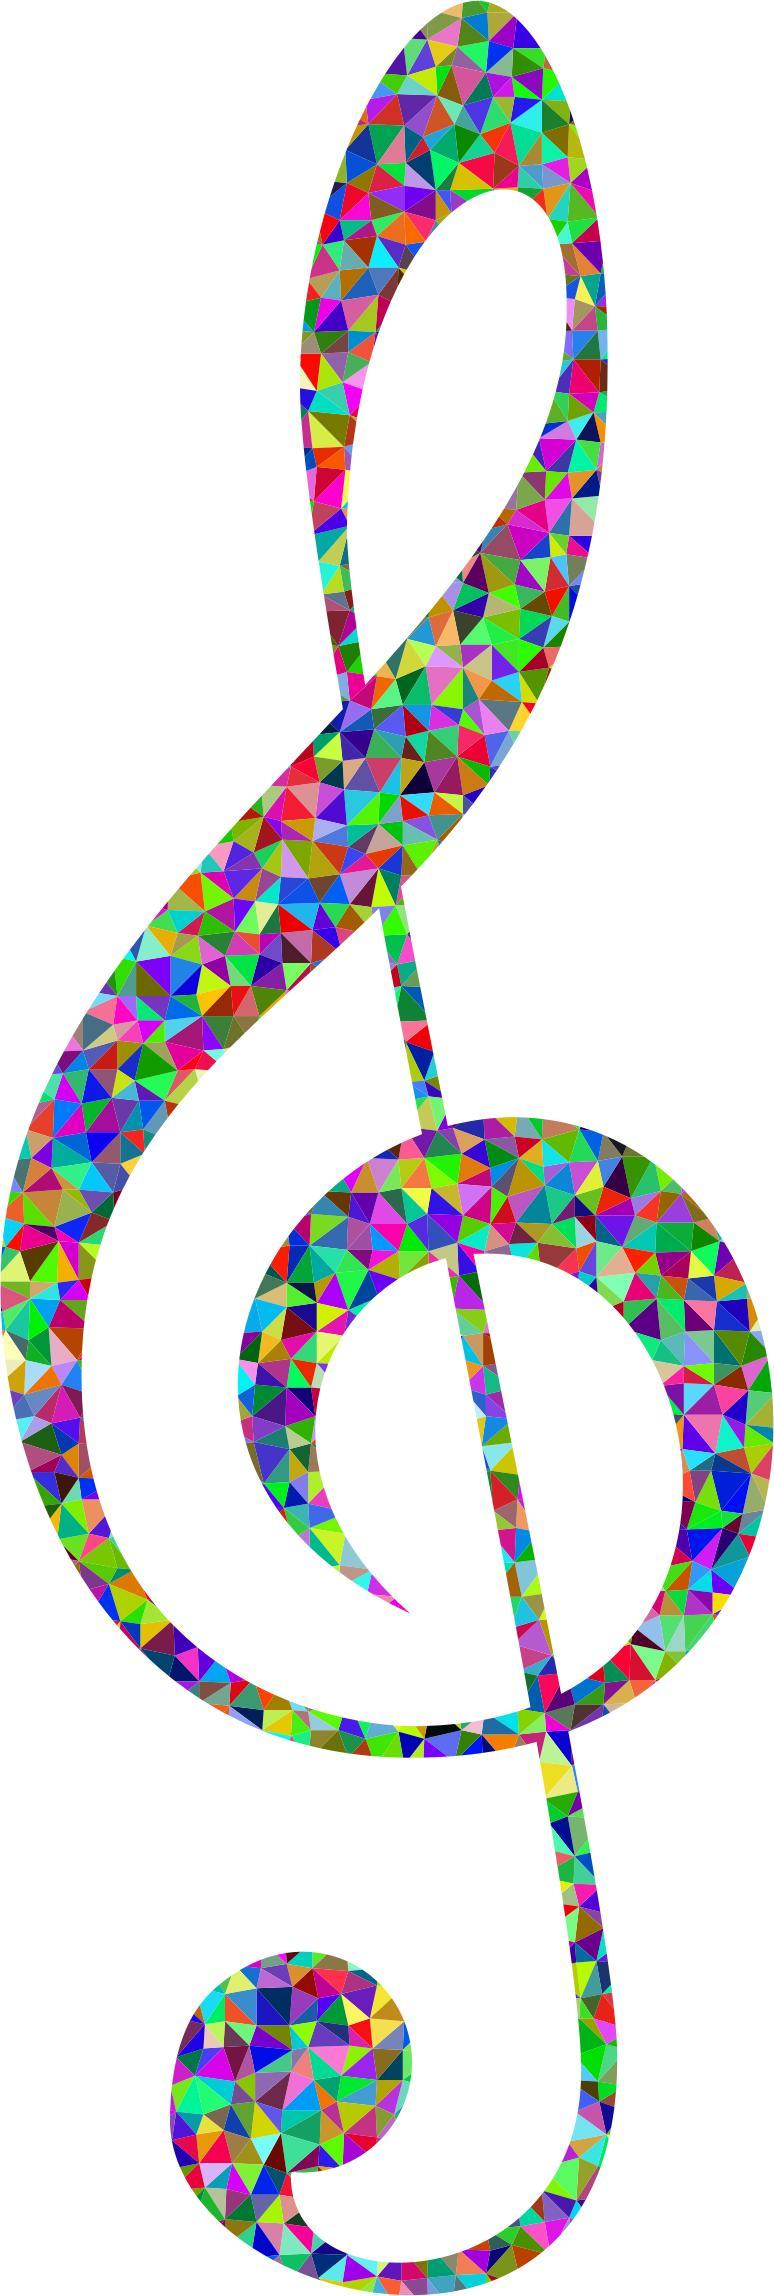 Prismatic Low Poly Clef High Detail png transparent